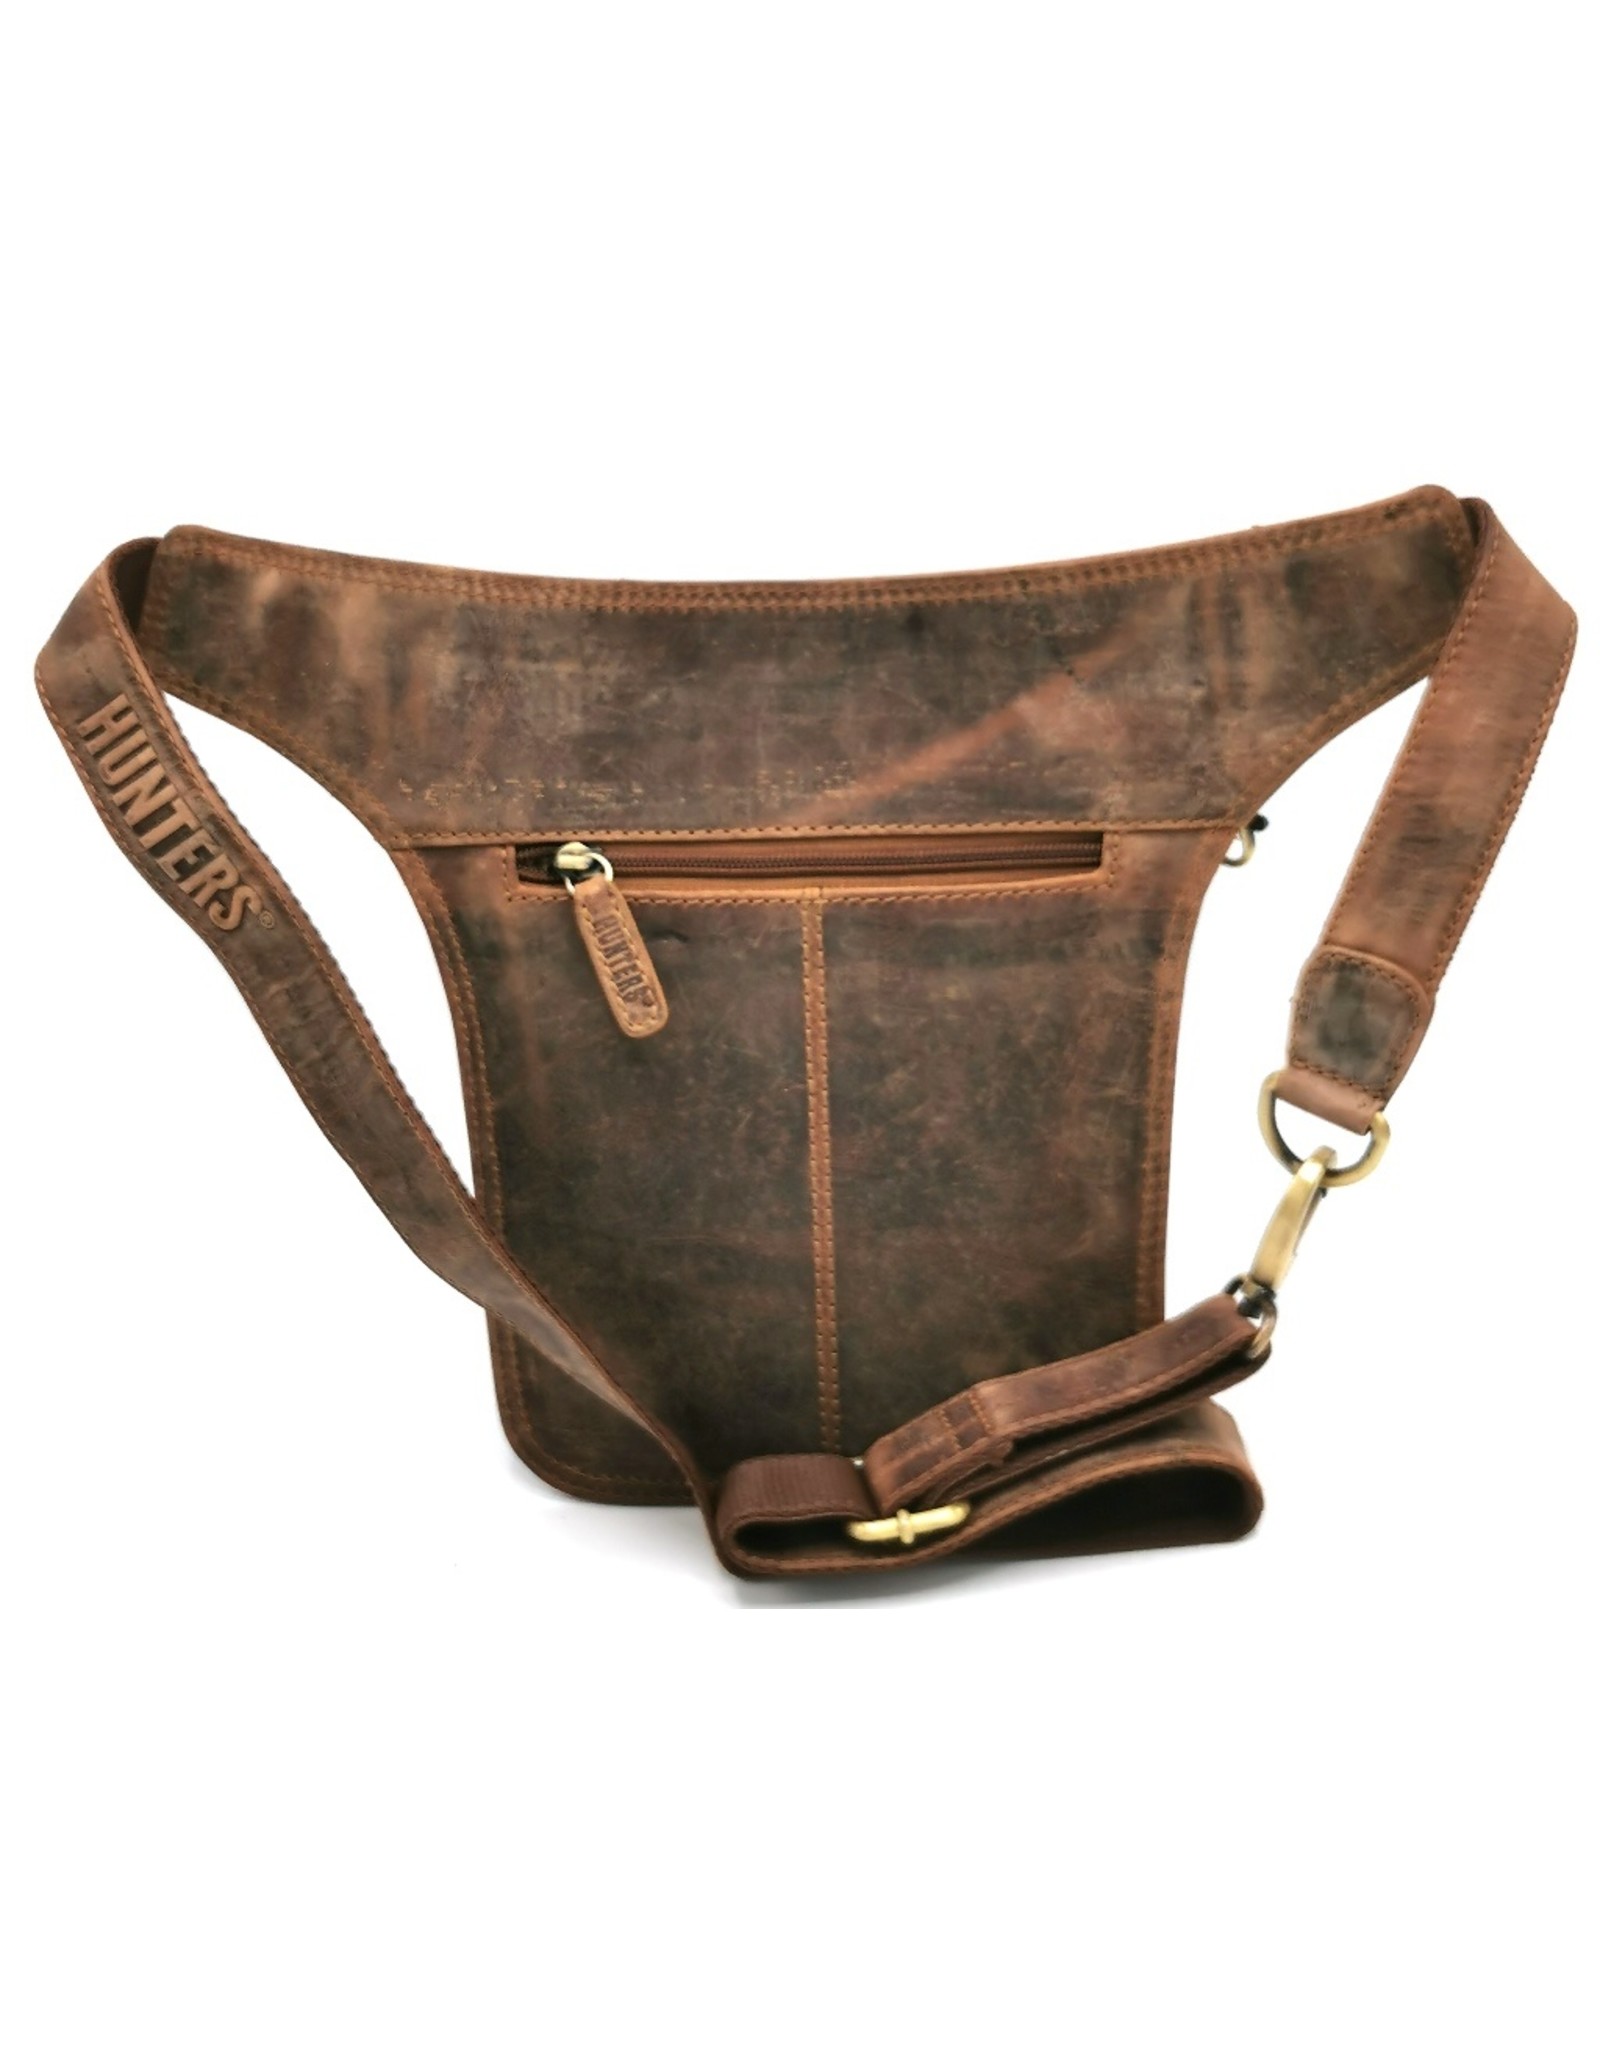 Hunters Leather bags -  Hunters Leather Waist bag Brown Tanned Leather